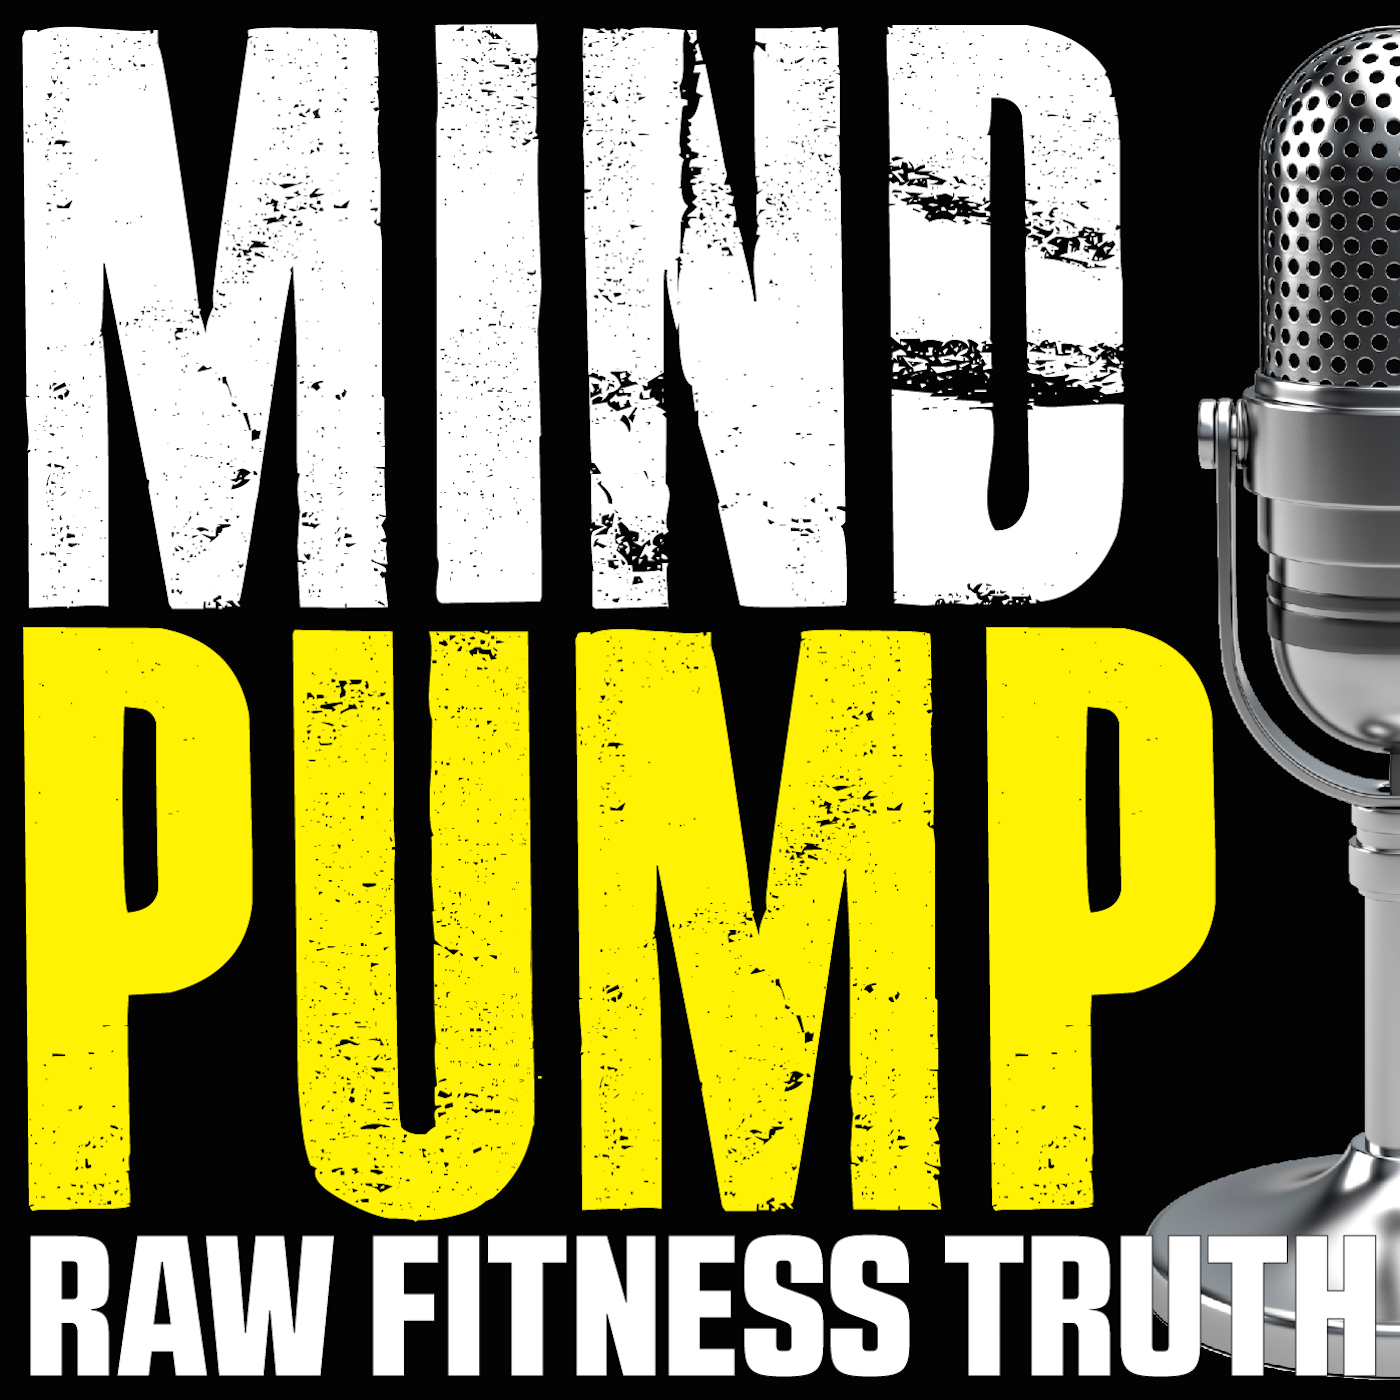 143: Sending positive vibes to a Pumphead